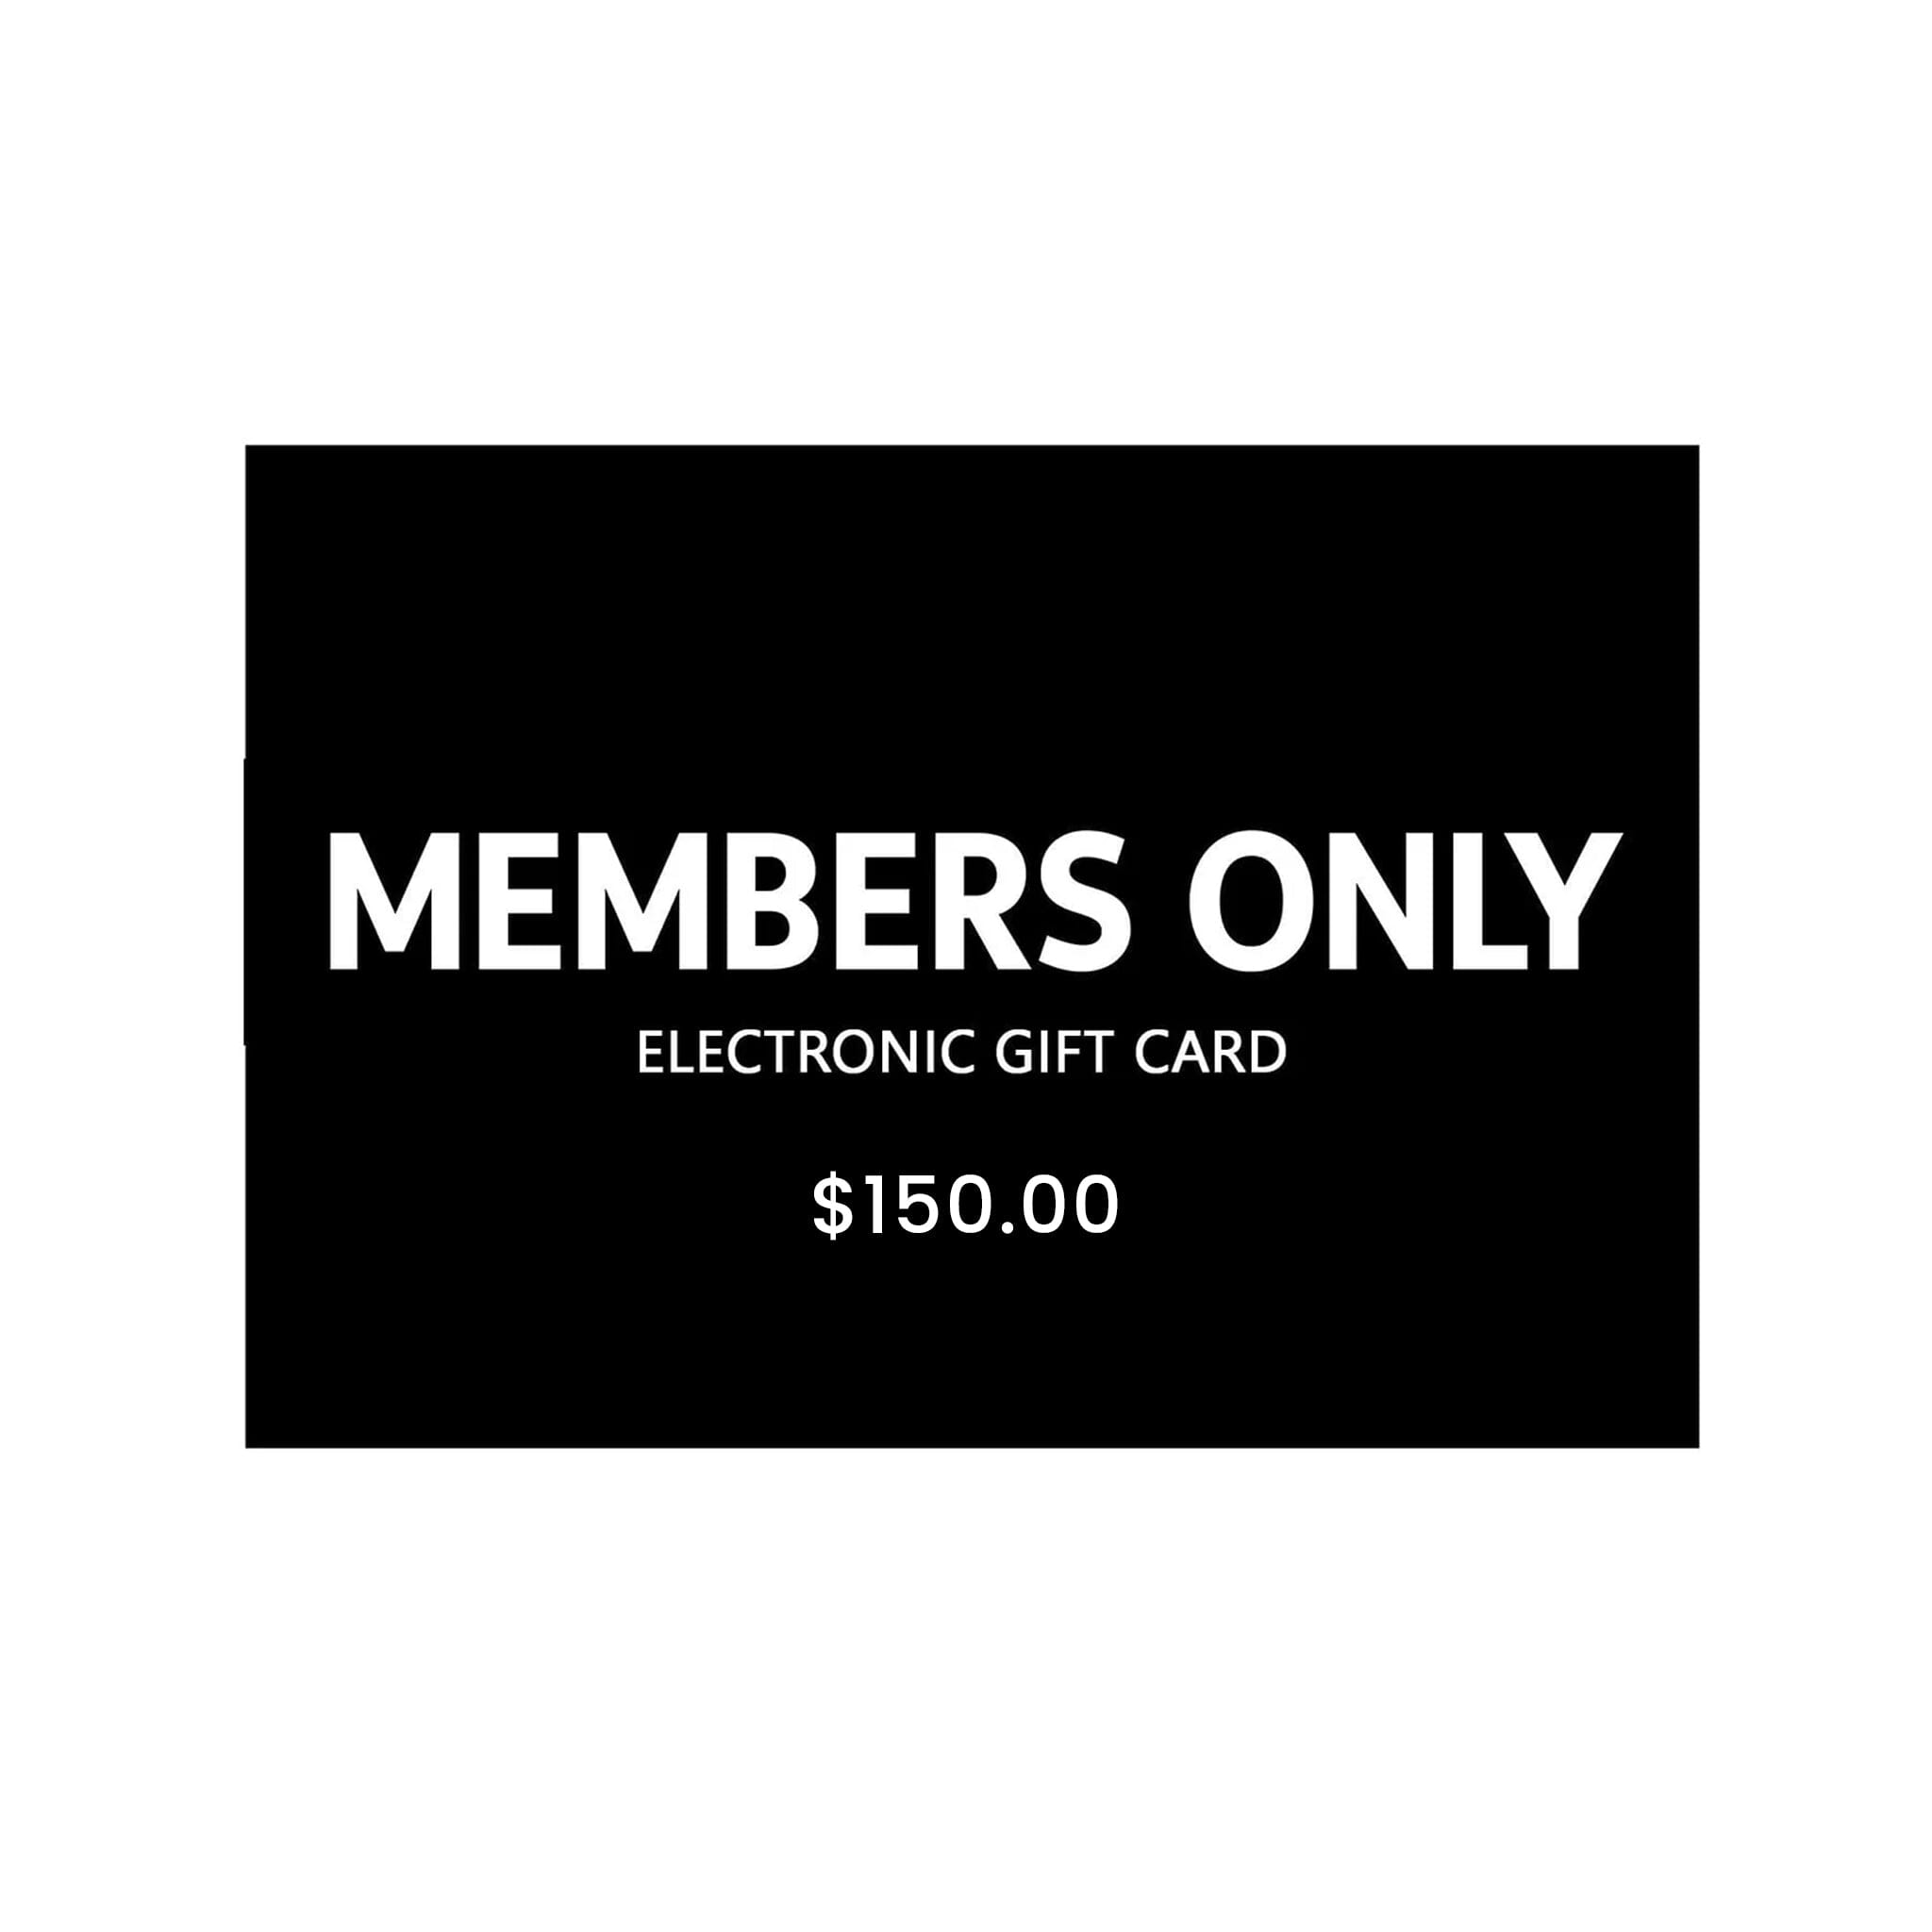 $150 Electronic Gift Card gift cards Members Only $150.00 